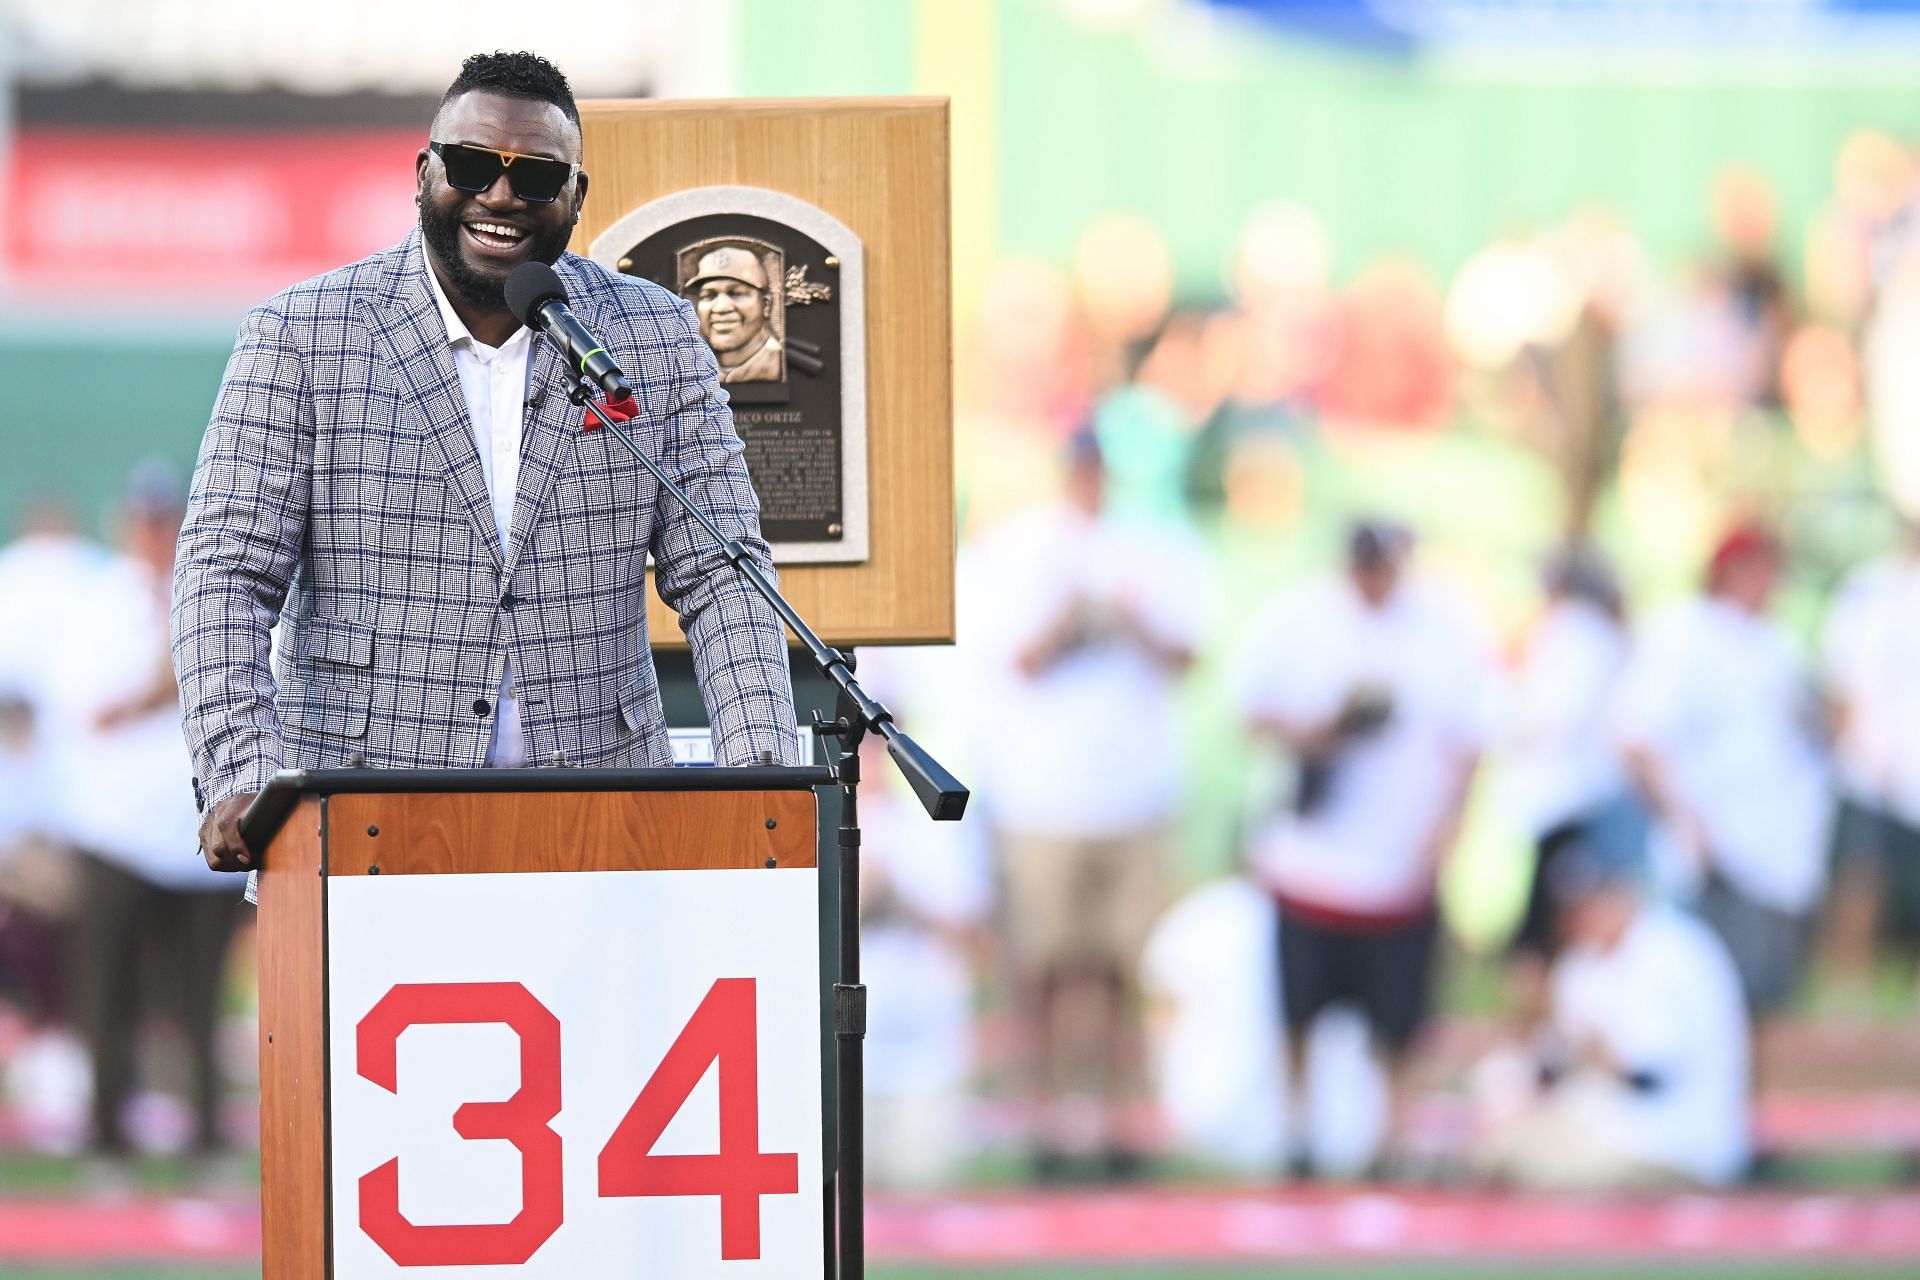 Former Boston Red Sox player David Ortiz is honored at Fenway Park following his weekend induction into the Baseball Hall of Fame, prior to the game against the Cleveland Guardians on July 26, 2022